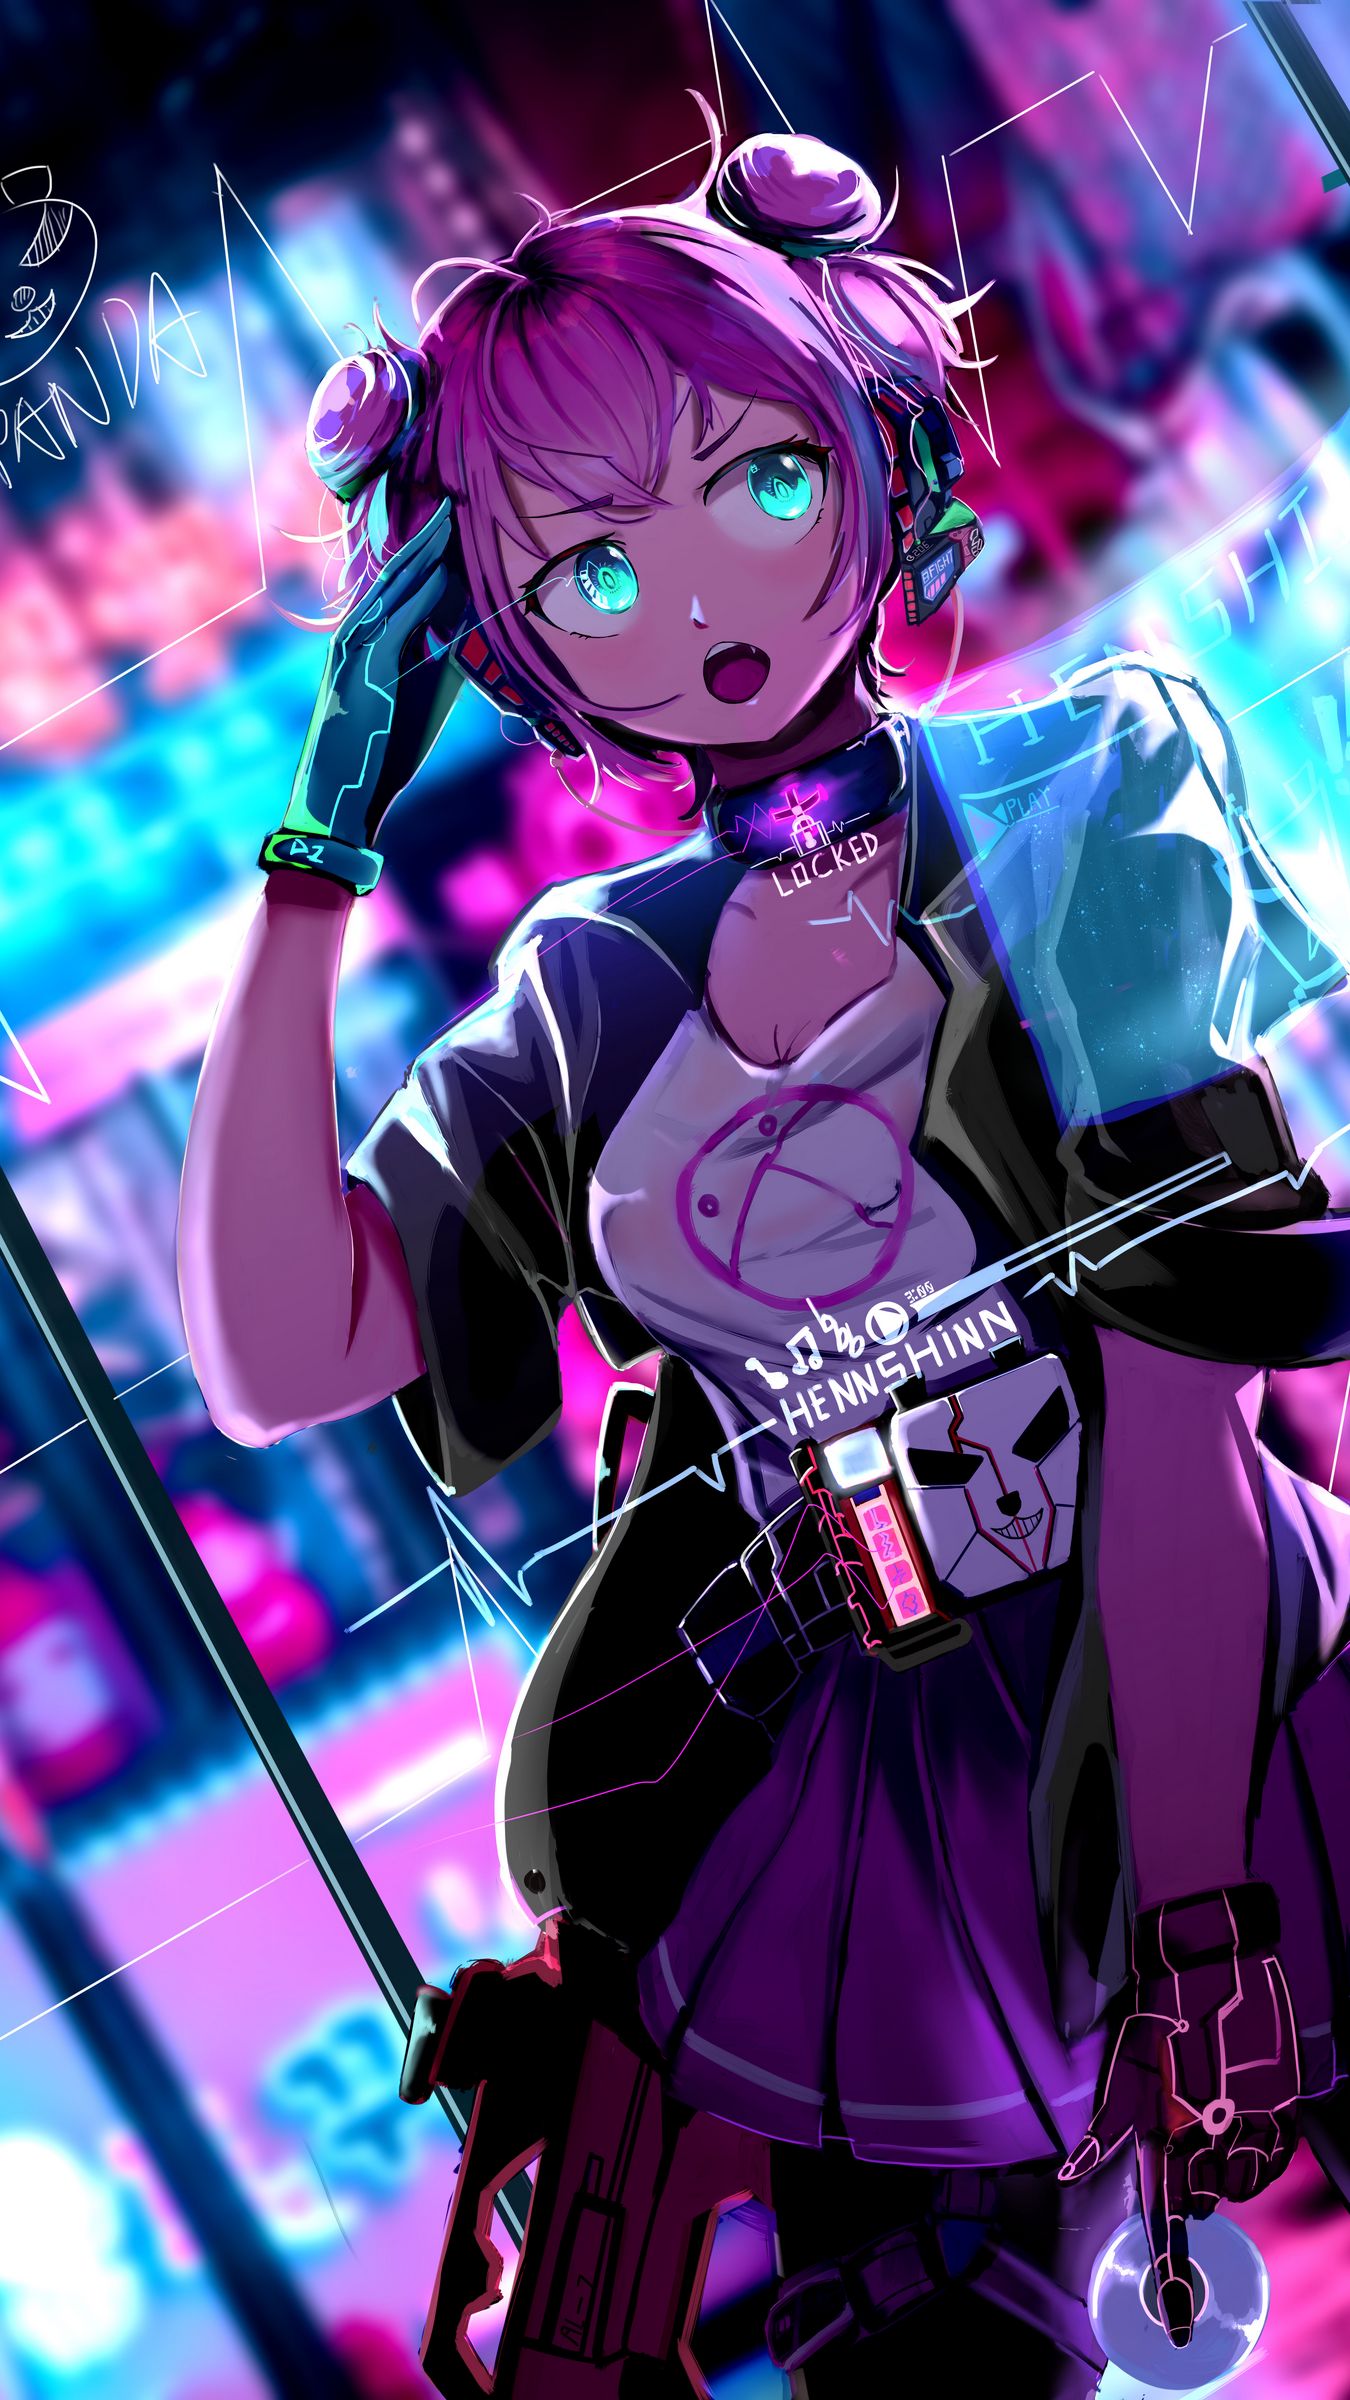 Download wallpaper 1350x2400 girl, glance, style, cyberpunk, anime, art  iphone 8+/7+/6s+/6+ for parallax hd background